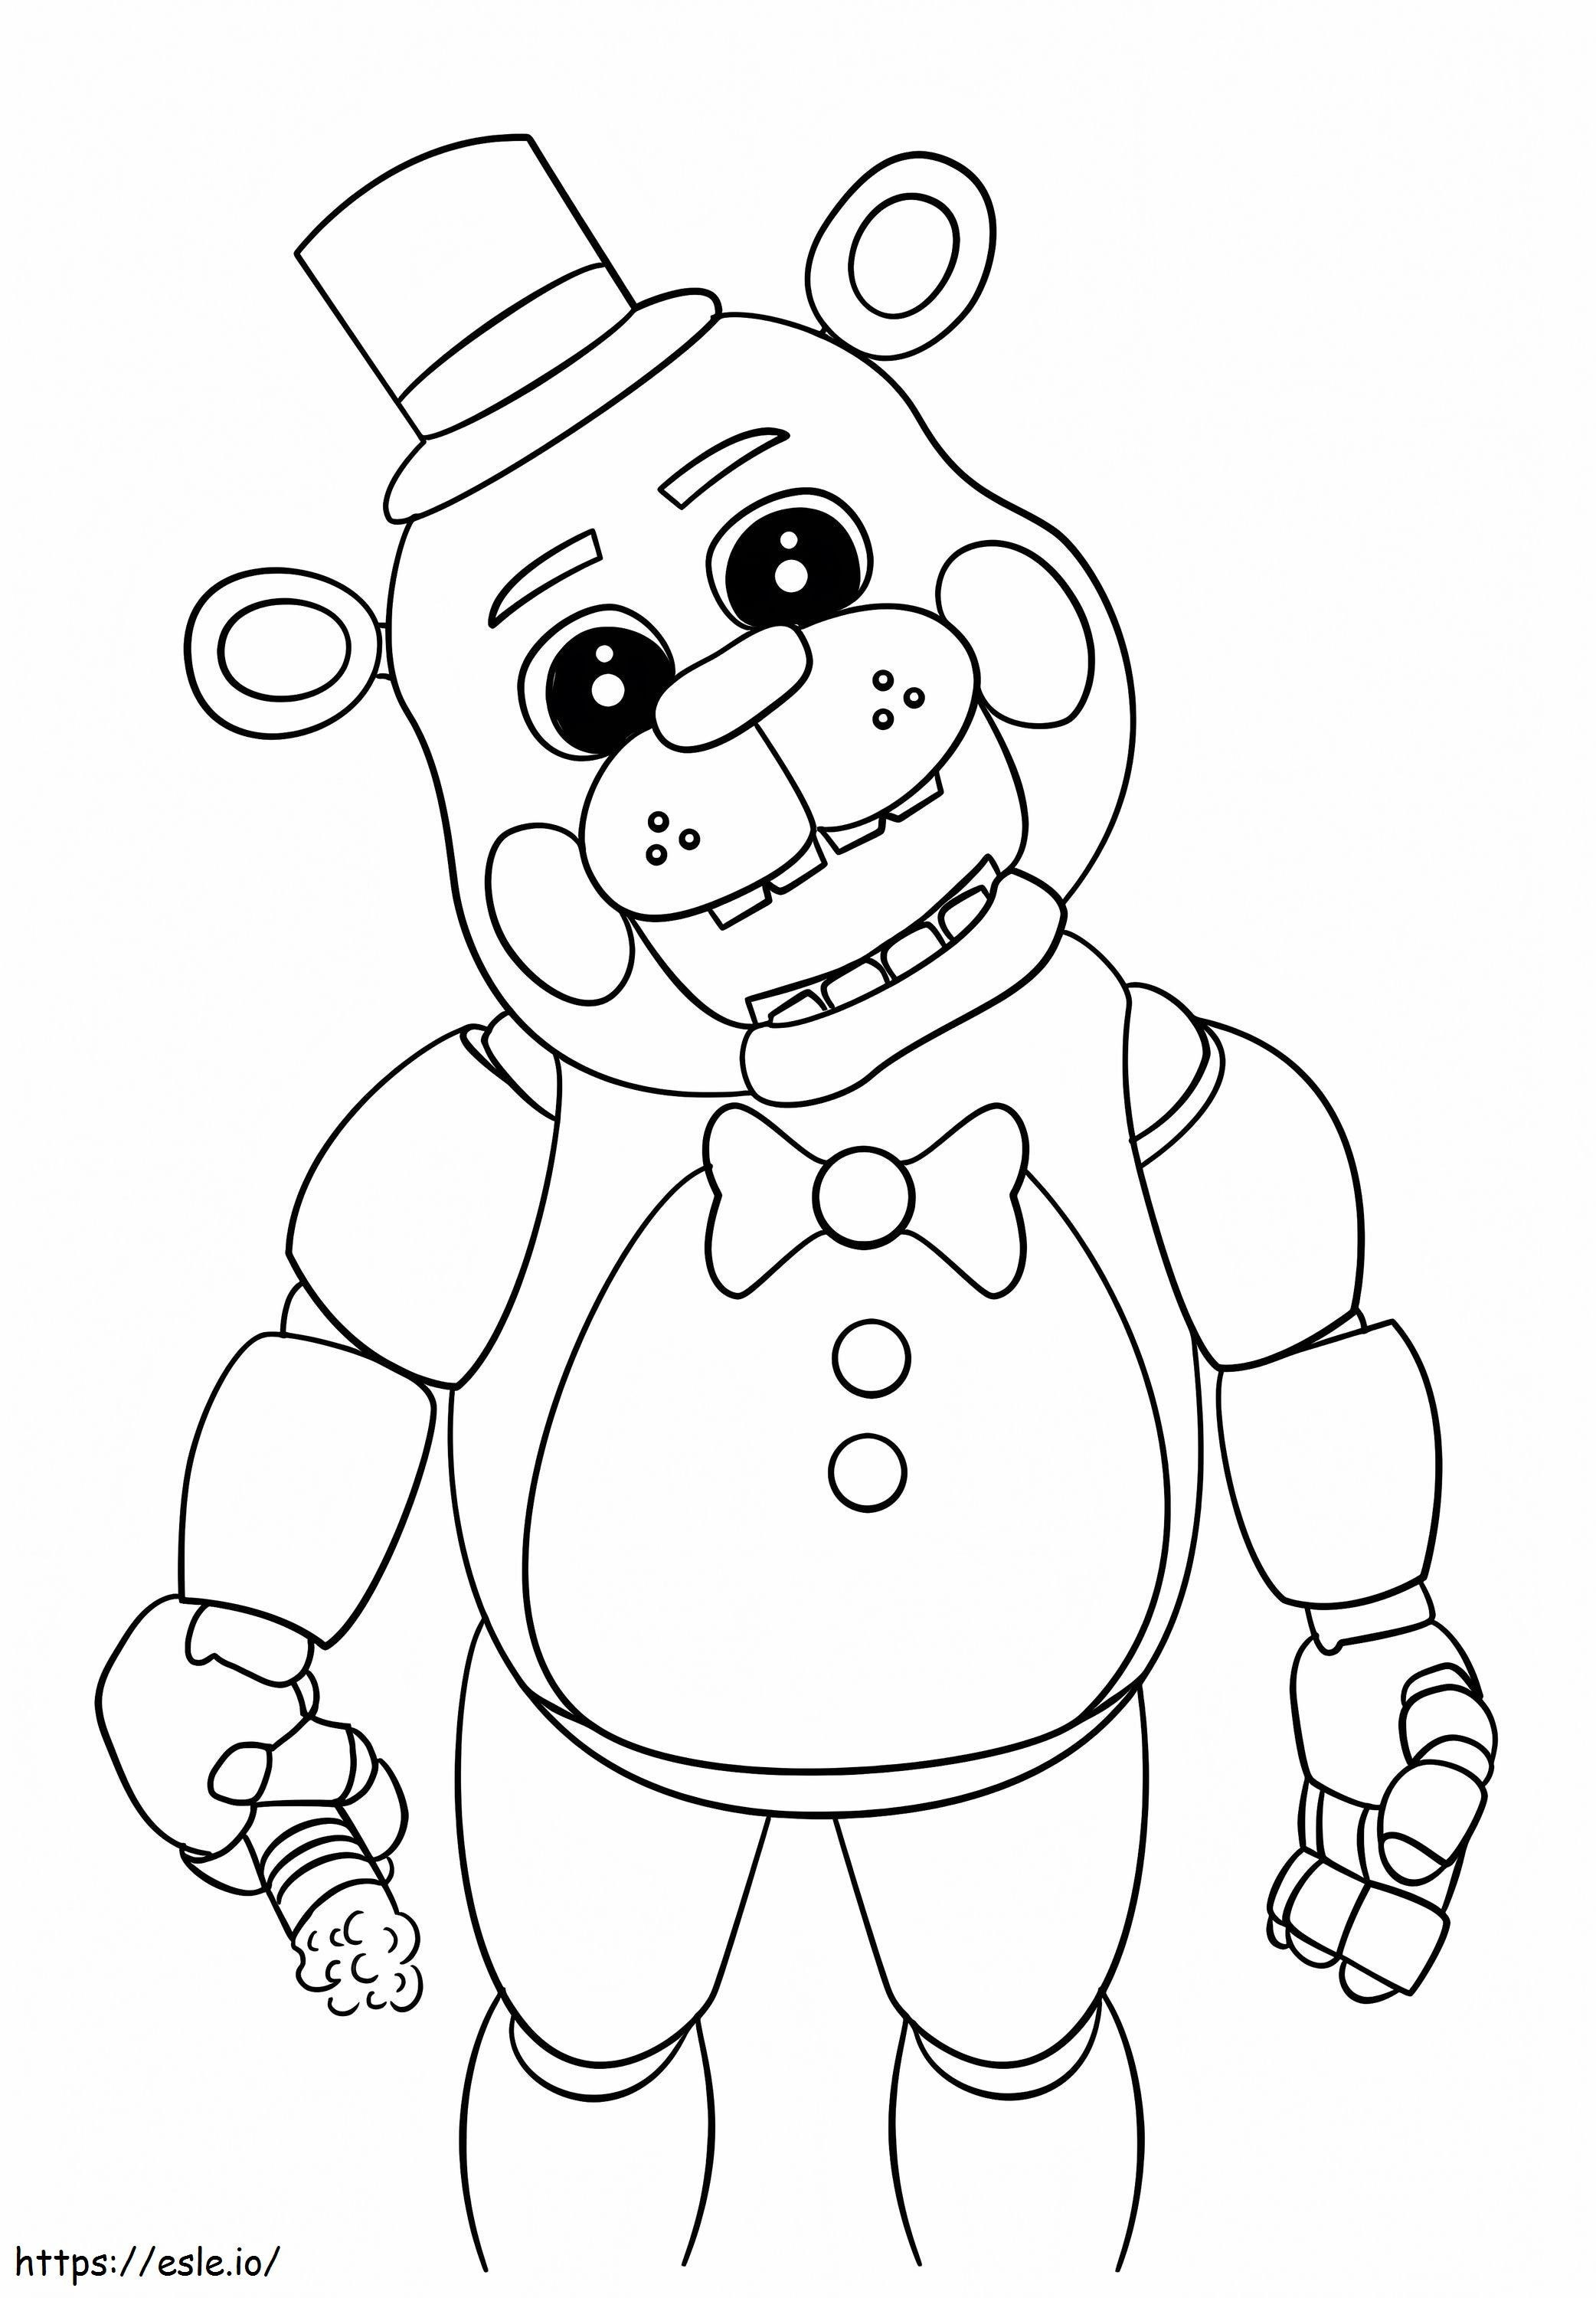 1576483773 Cute Five Nights At Freddys coloring page